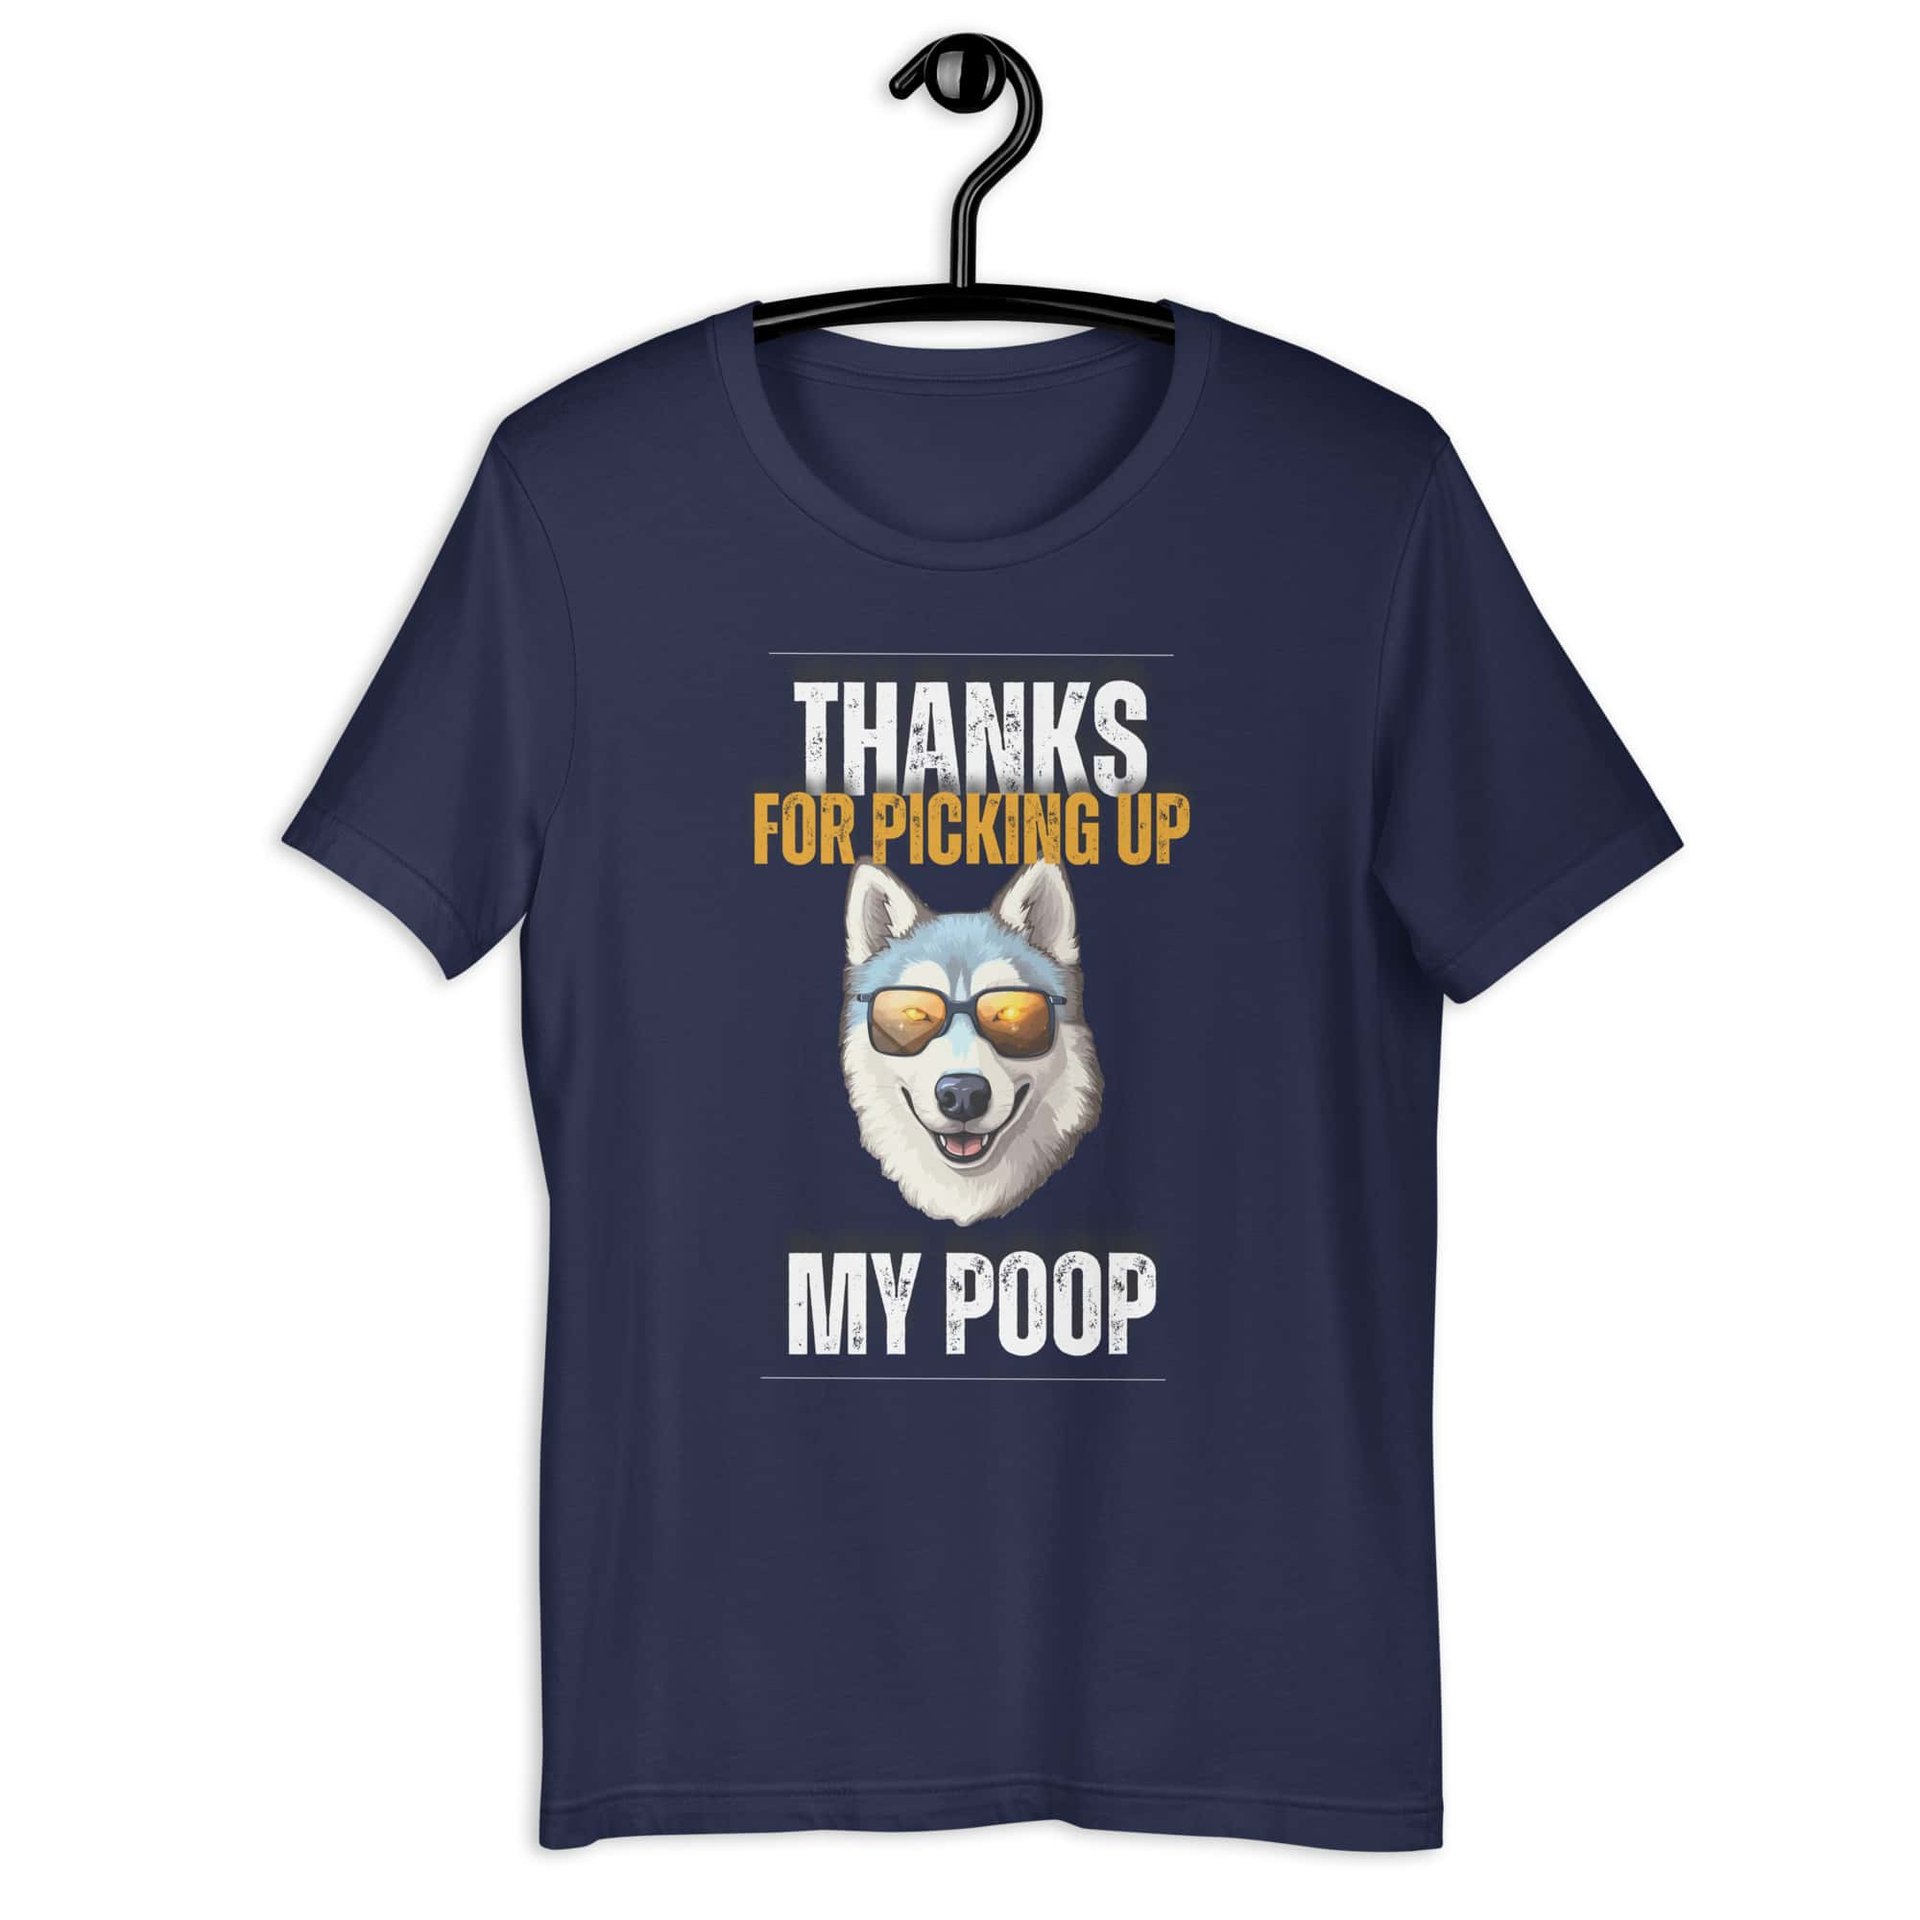 Thanks For Picking Up My POOP Funny Huskies Unisex T-Shirt. Navy